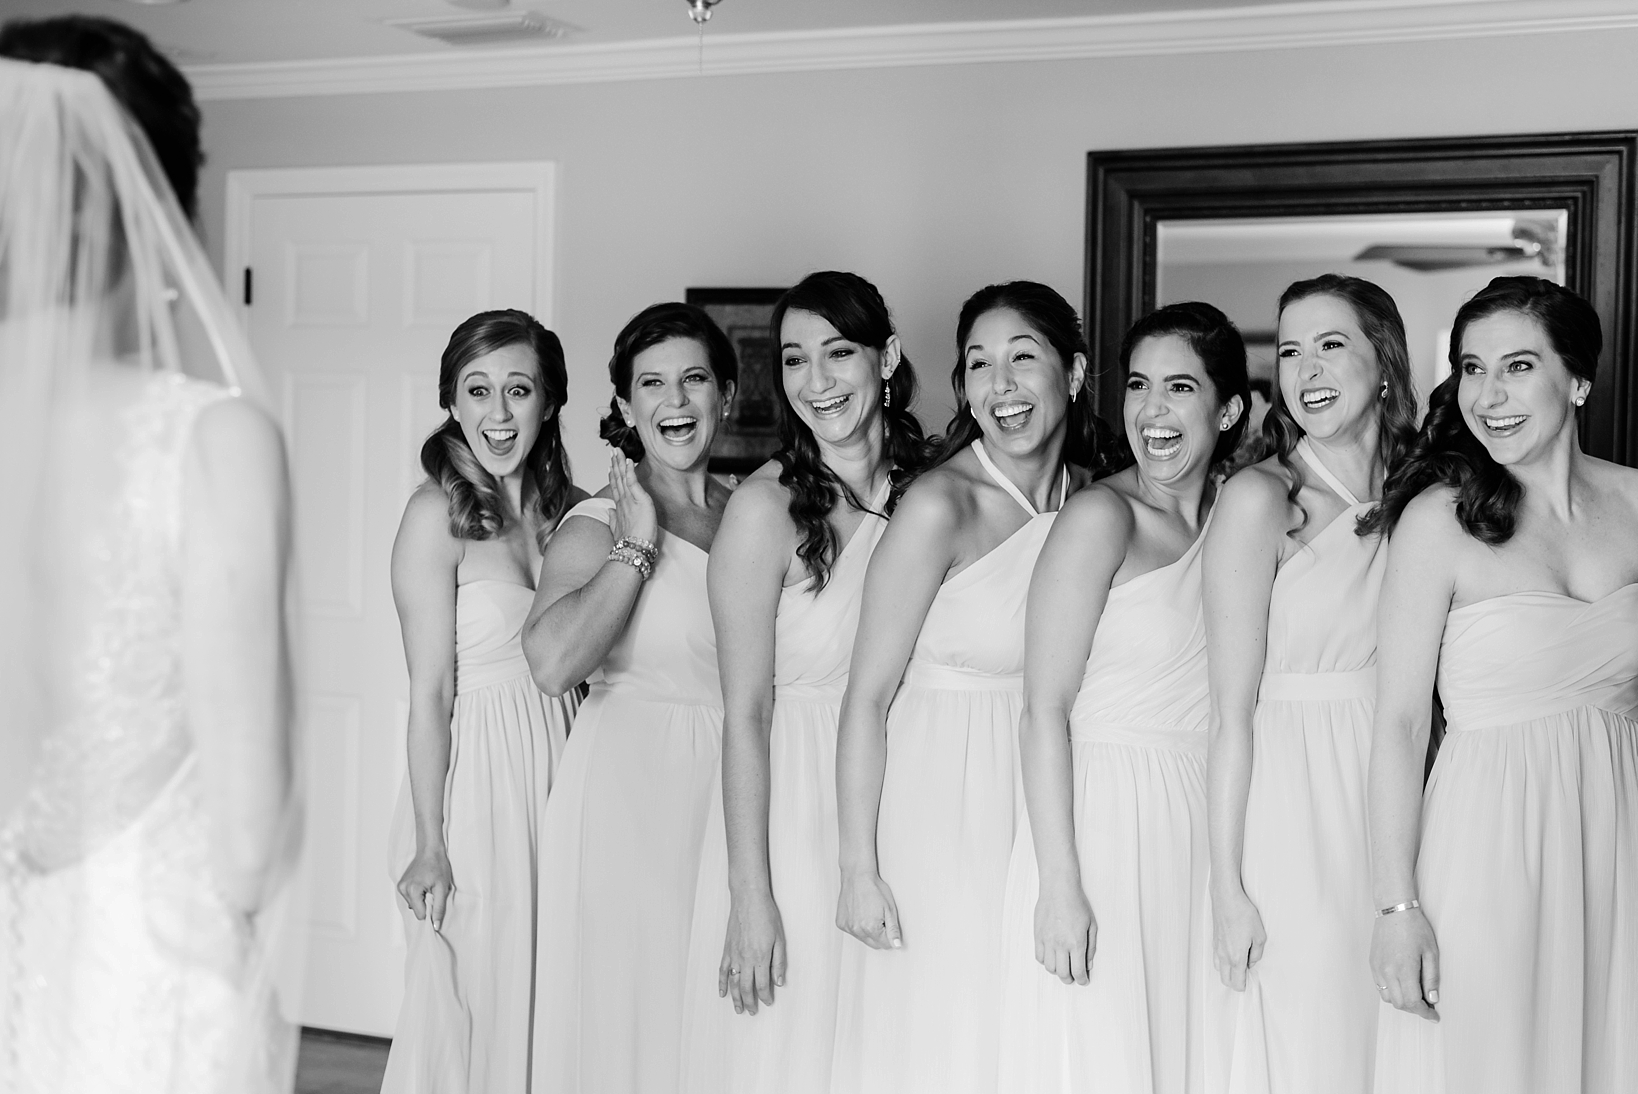 The bridesmaids seeing the bride for the first time on her wedding day by Sarah & Ben Photography